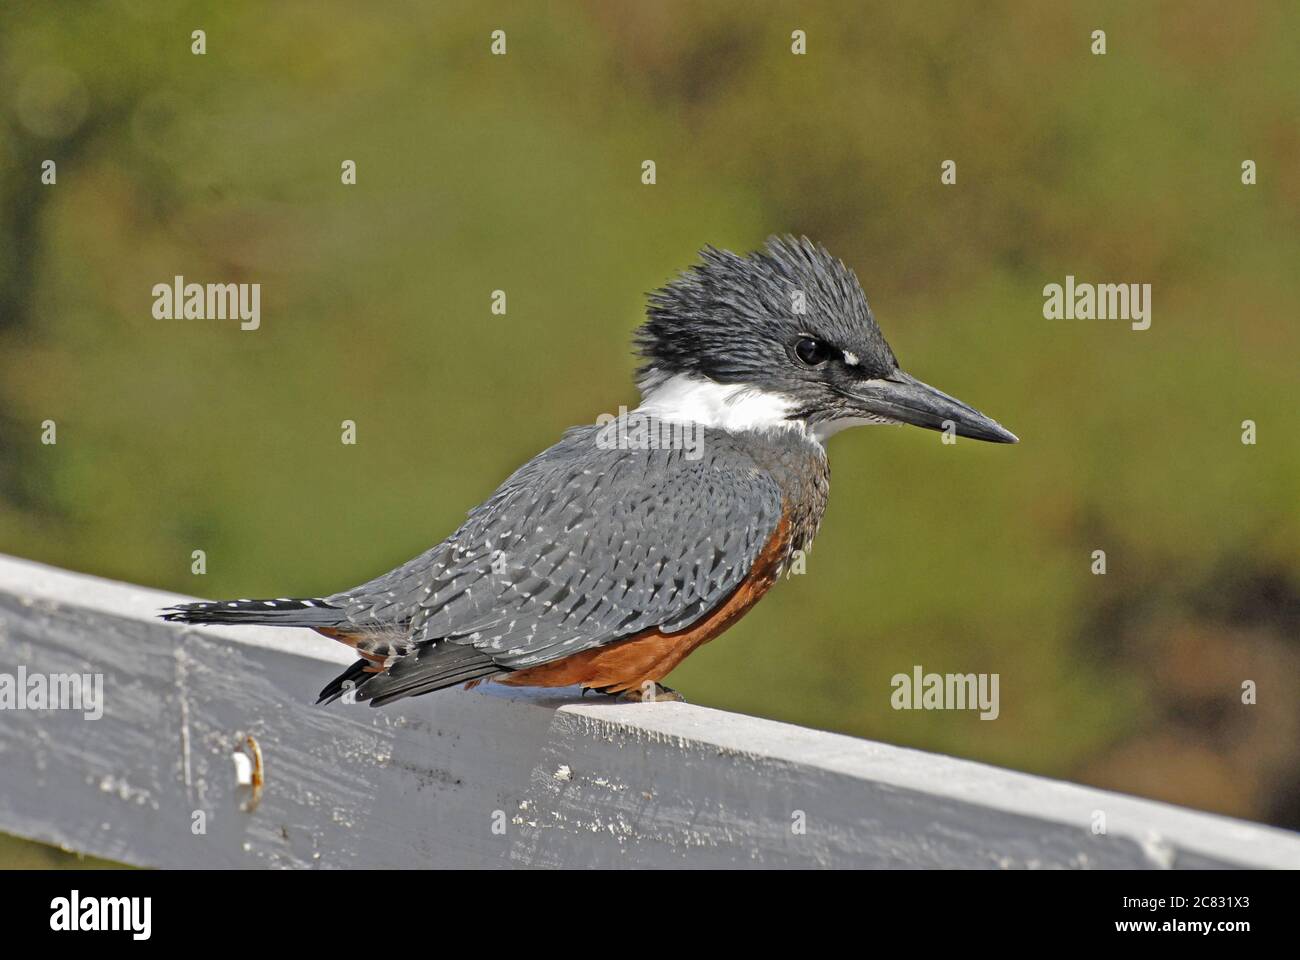 Selective focus shot of a cute belted kingfisher bird on a white wooden fence Stock Photo